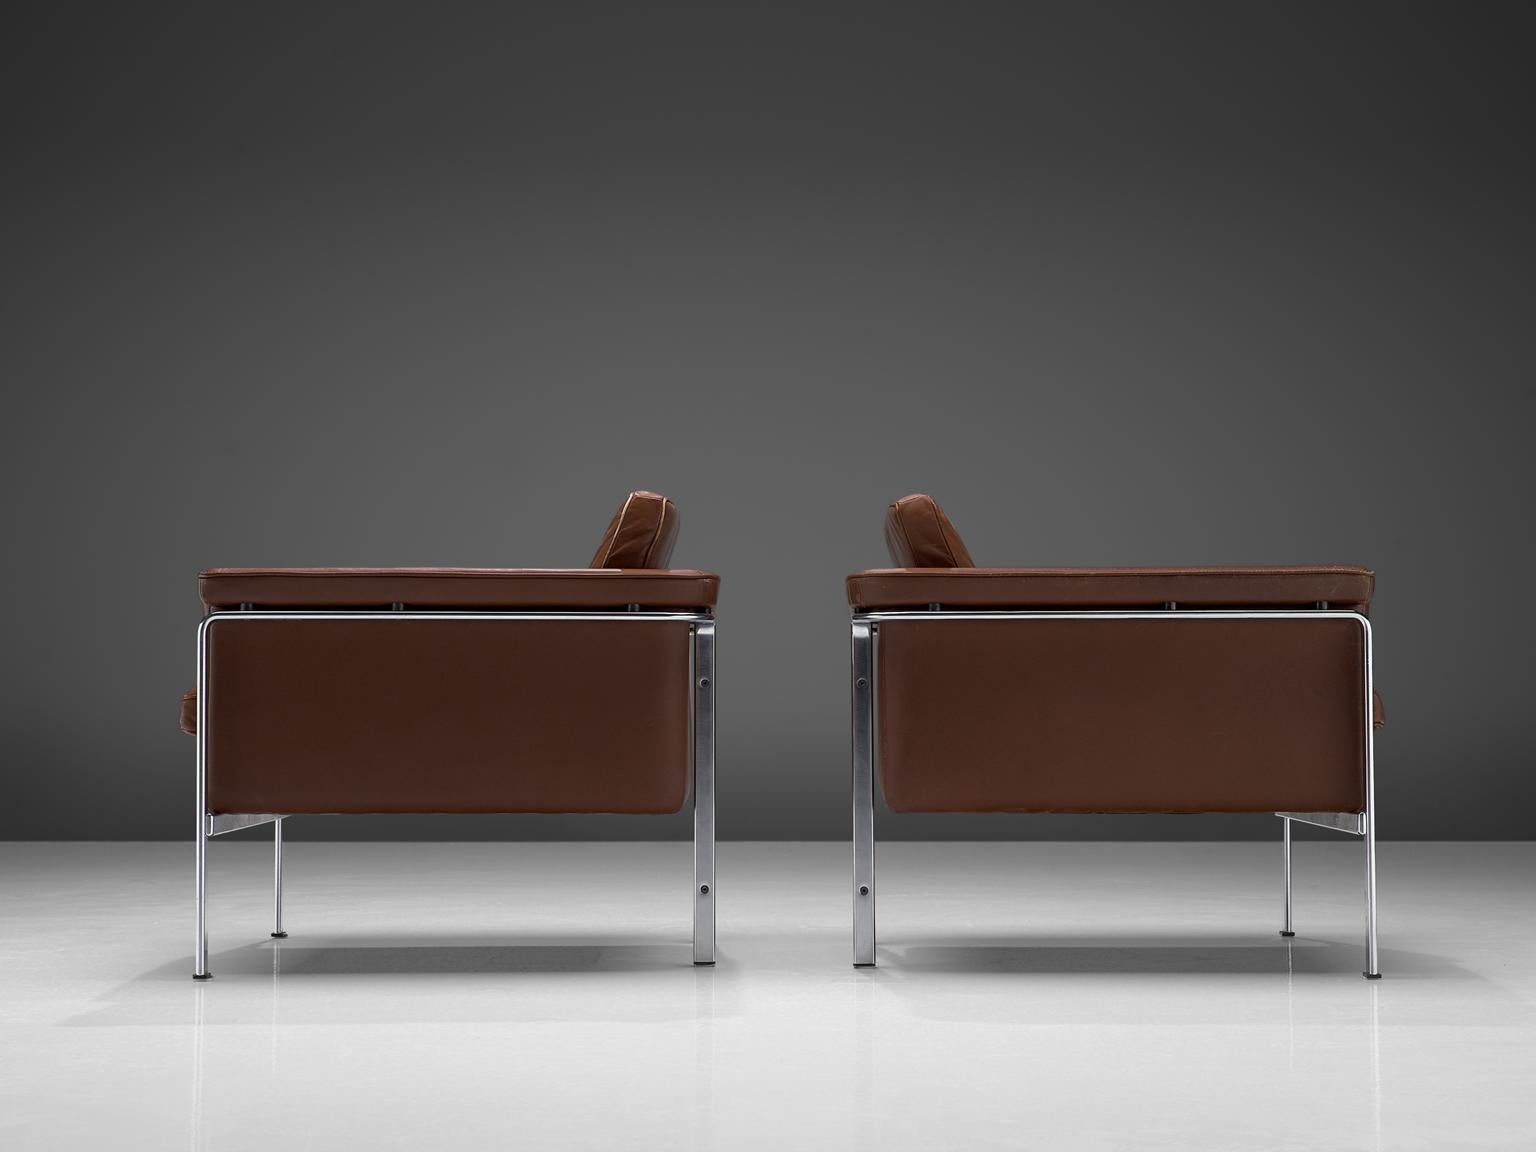 German Horst Bruning Lounge Chairs in Brown Leather